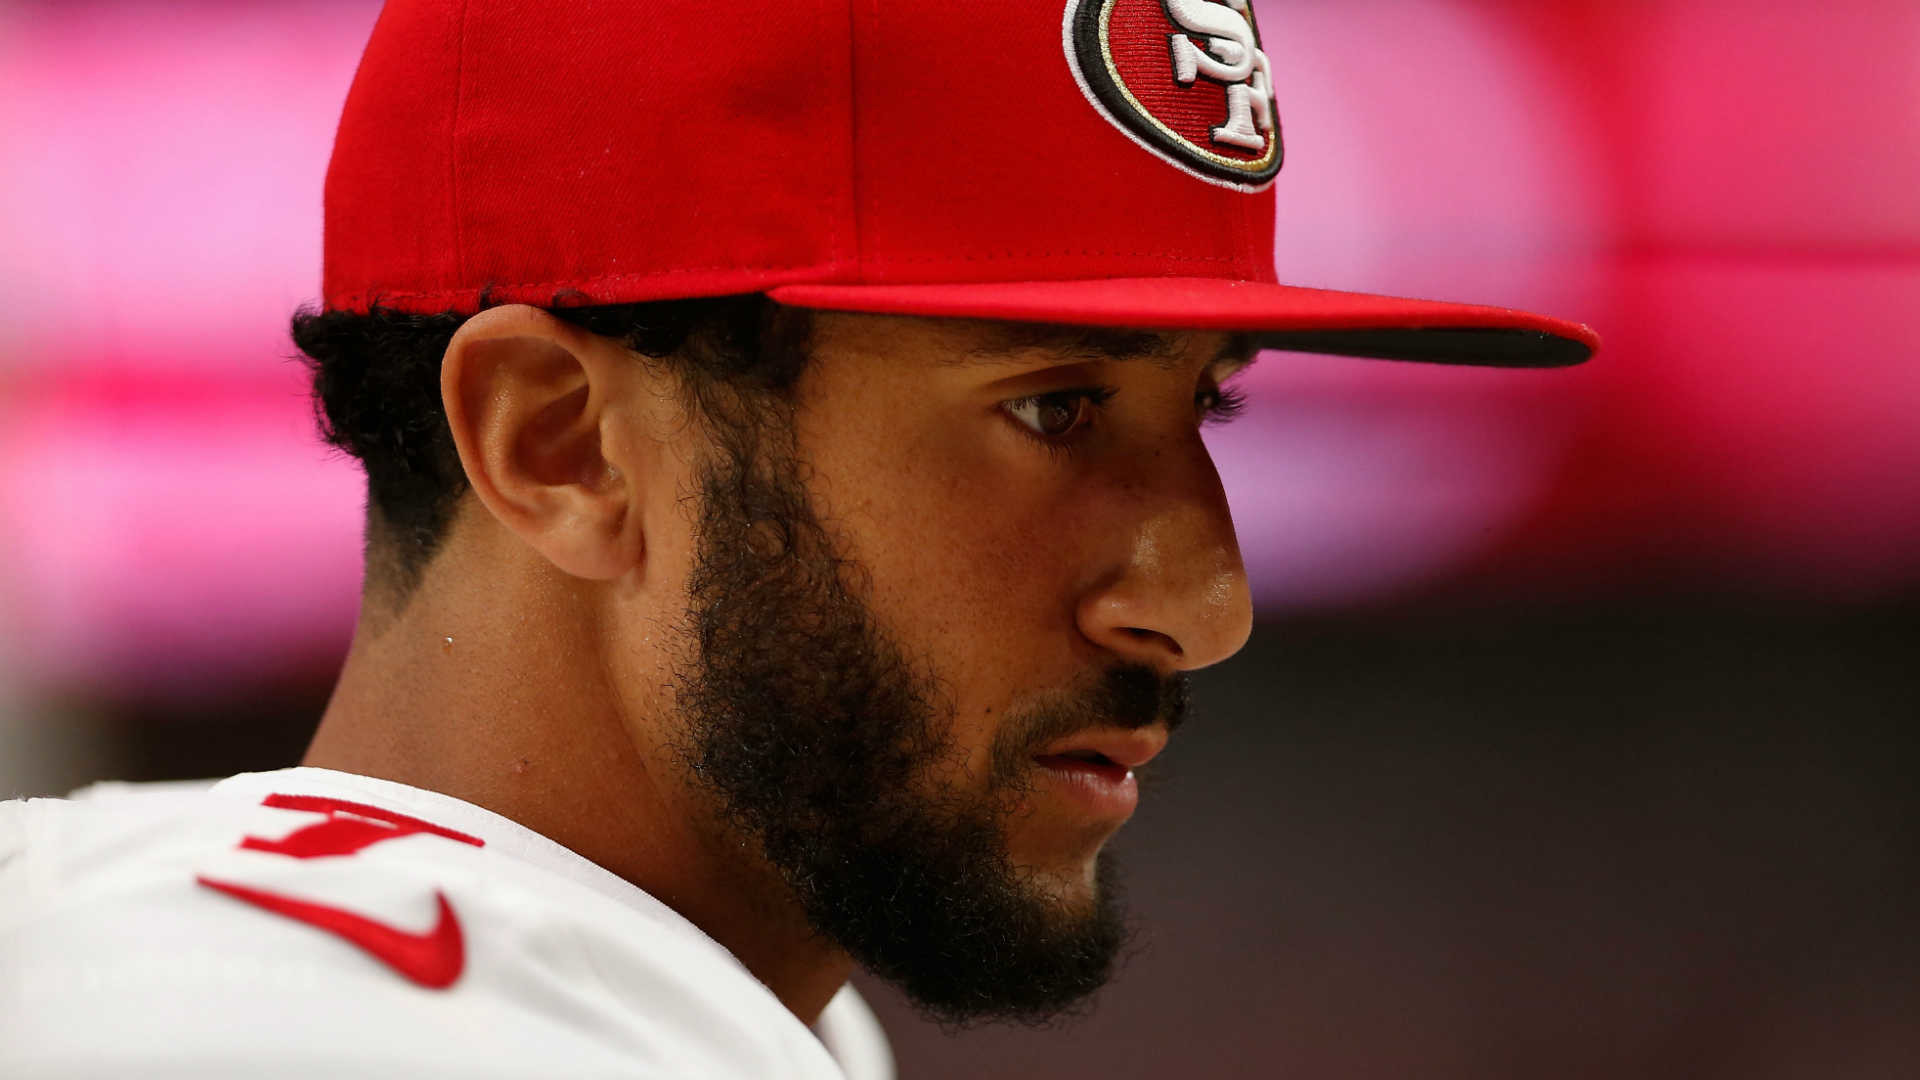 1920x1080 Download now full hd wallpaper colin kaepernick face side view american  football ...